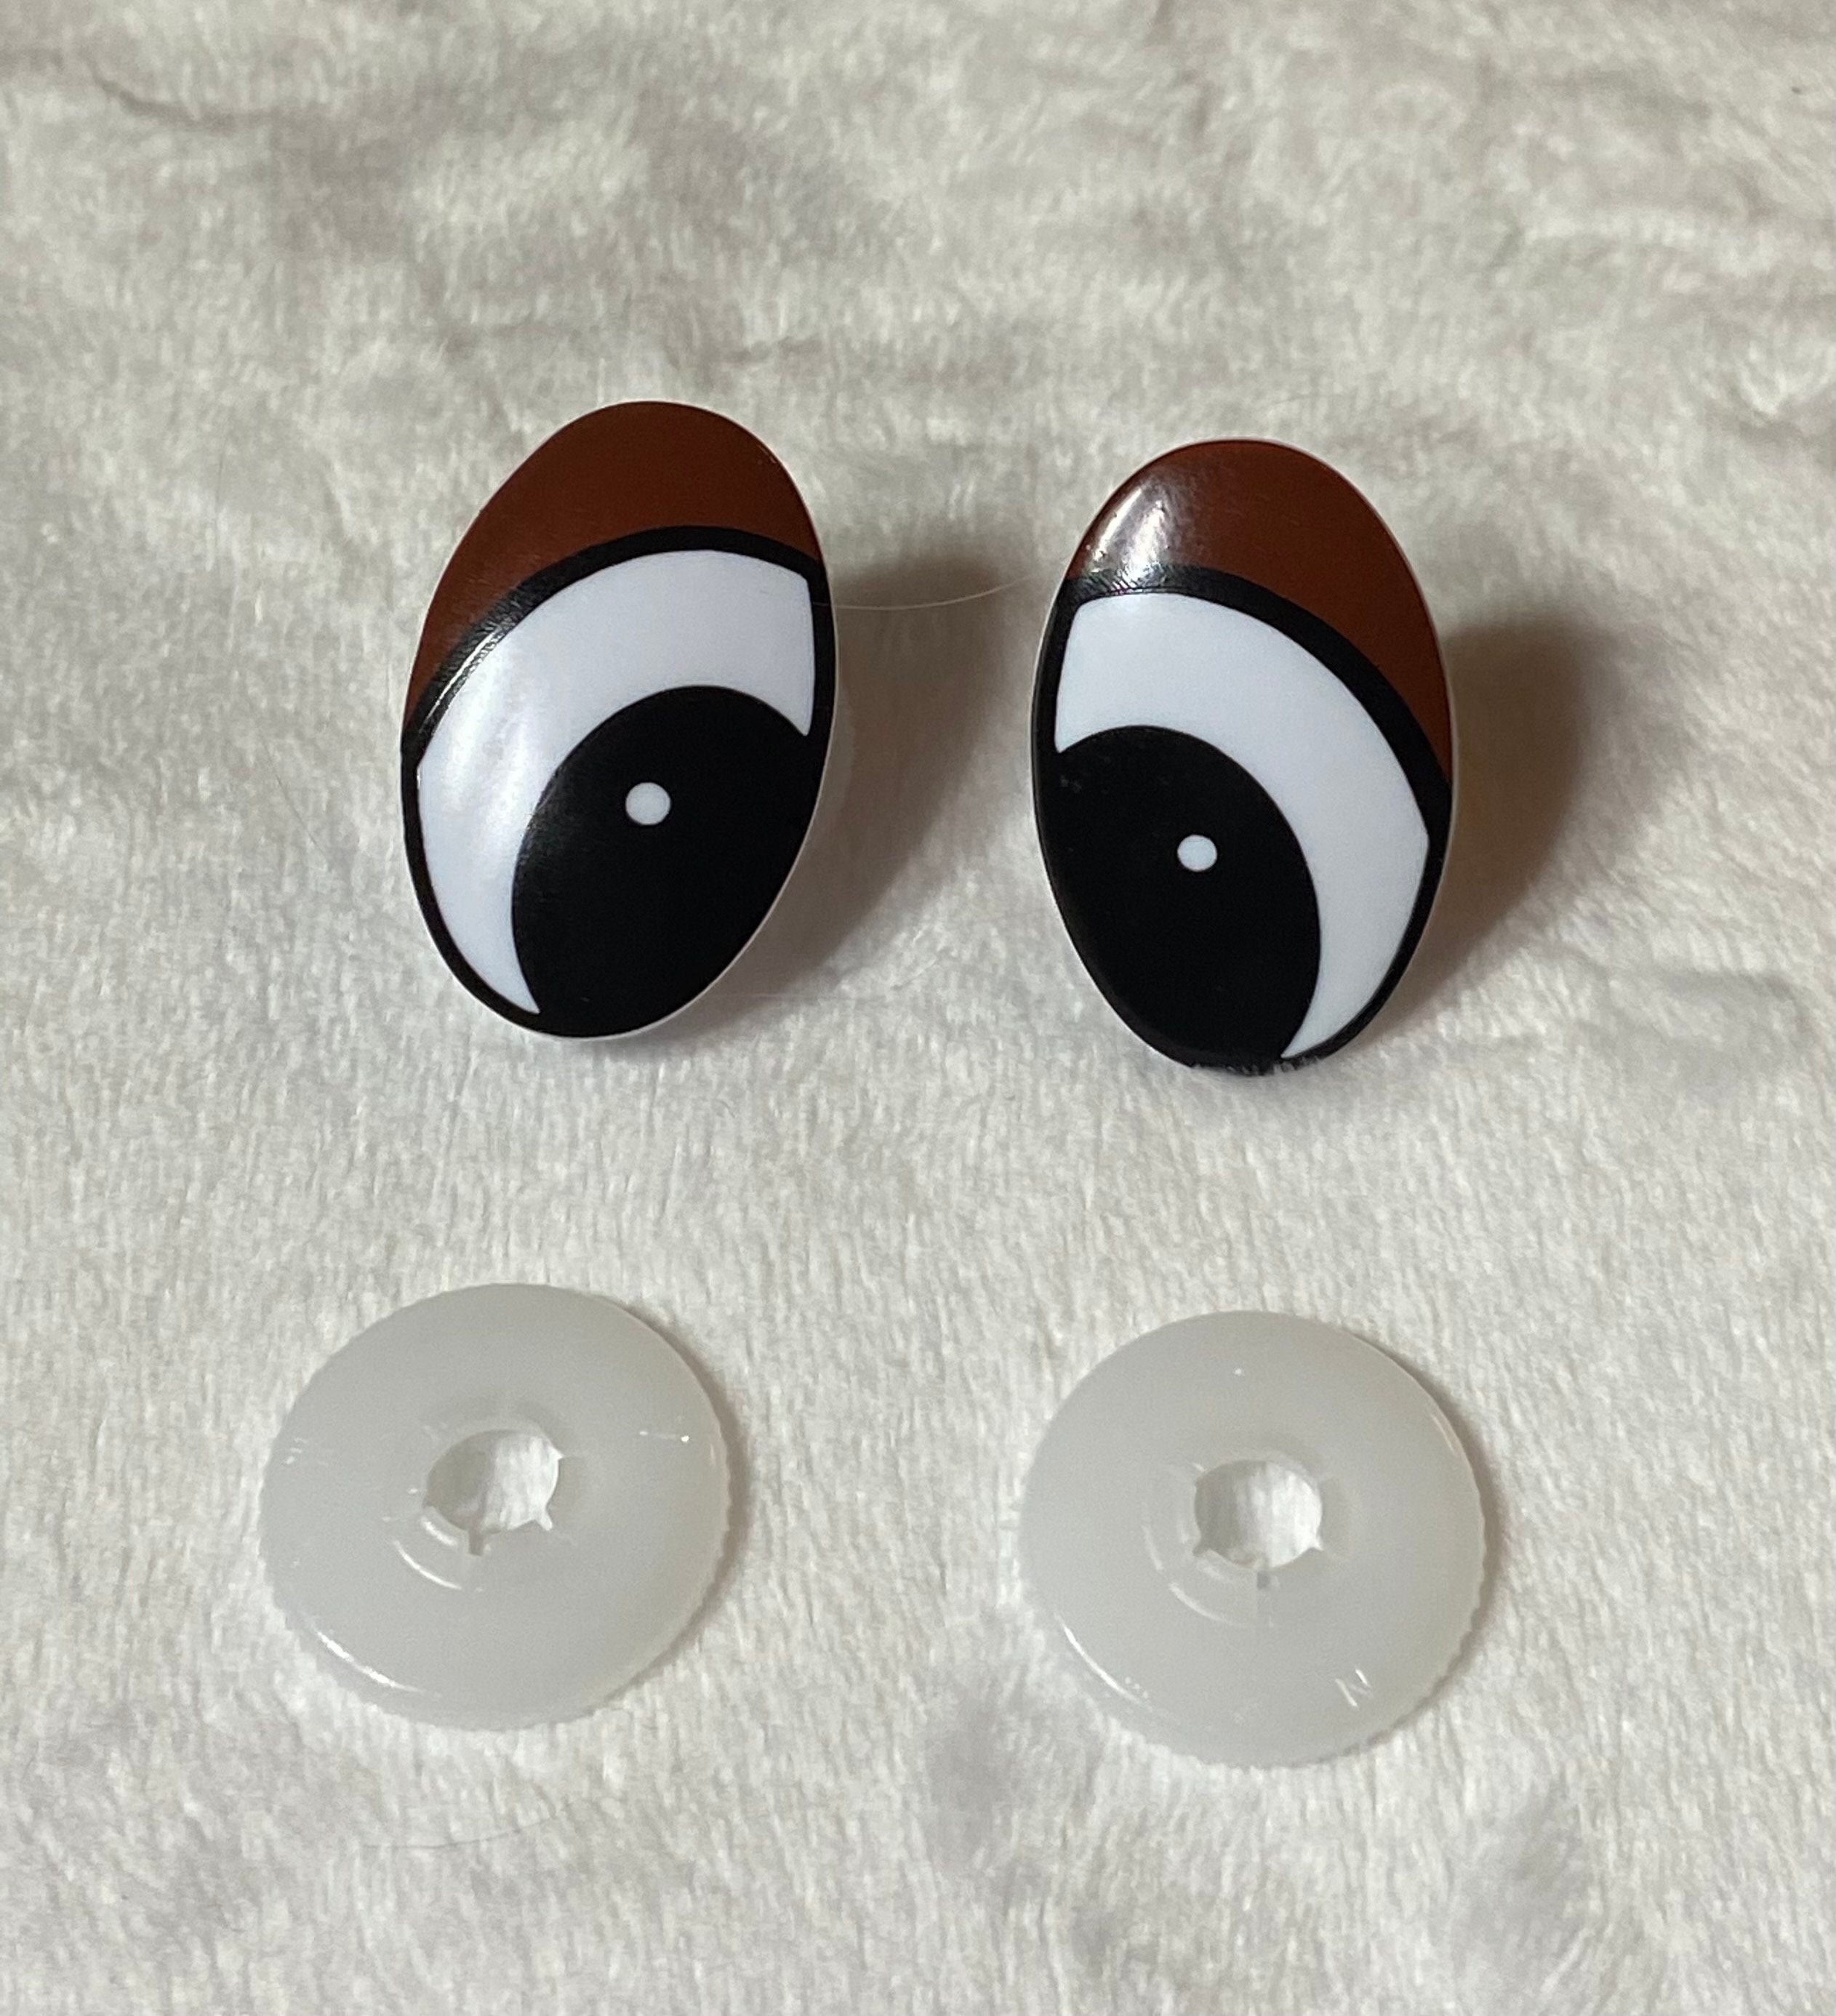 566PCS Safety Eyes and Noses, Plastic Black Safety Eyes With Washers, Craft  Doll Eyes and Nose of Various Sizes for Amigurumi 